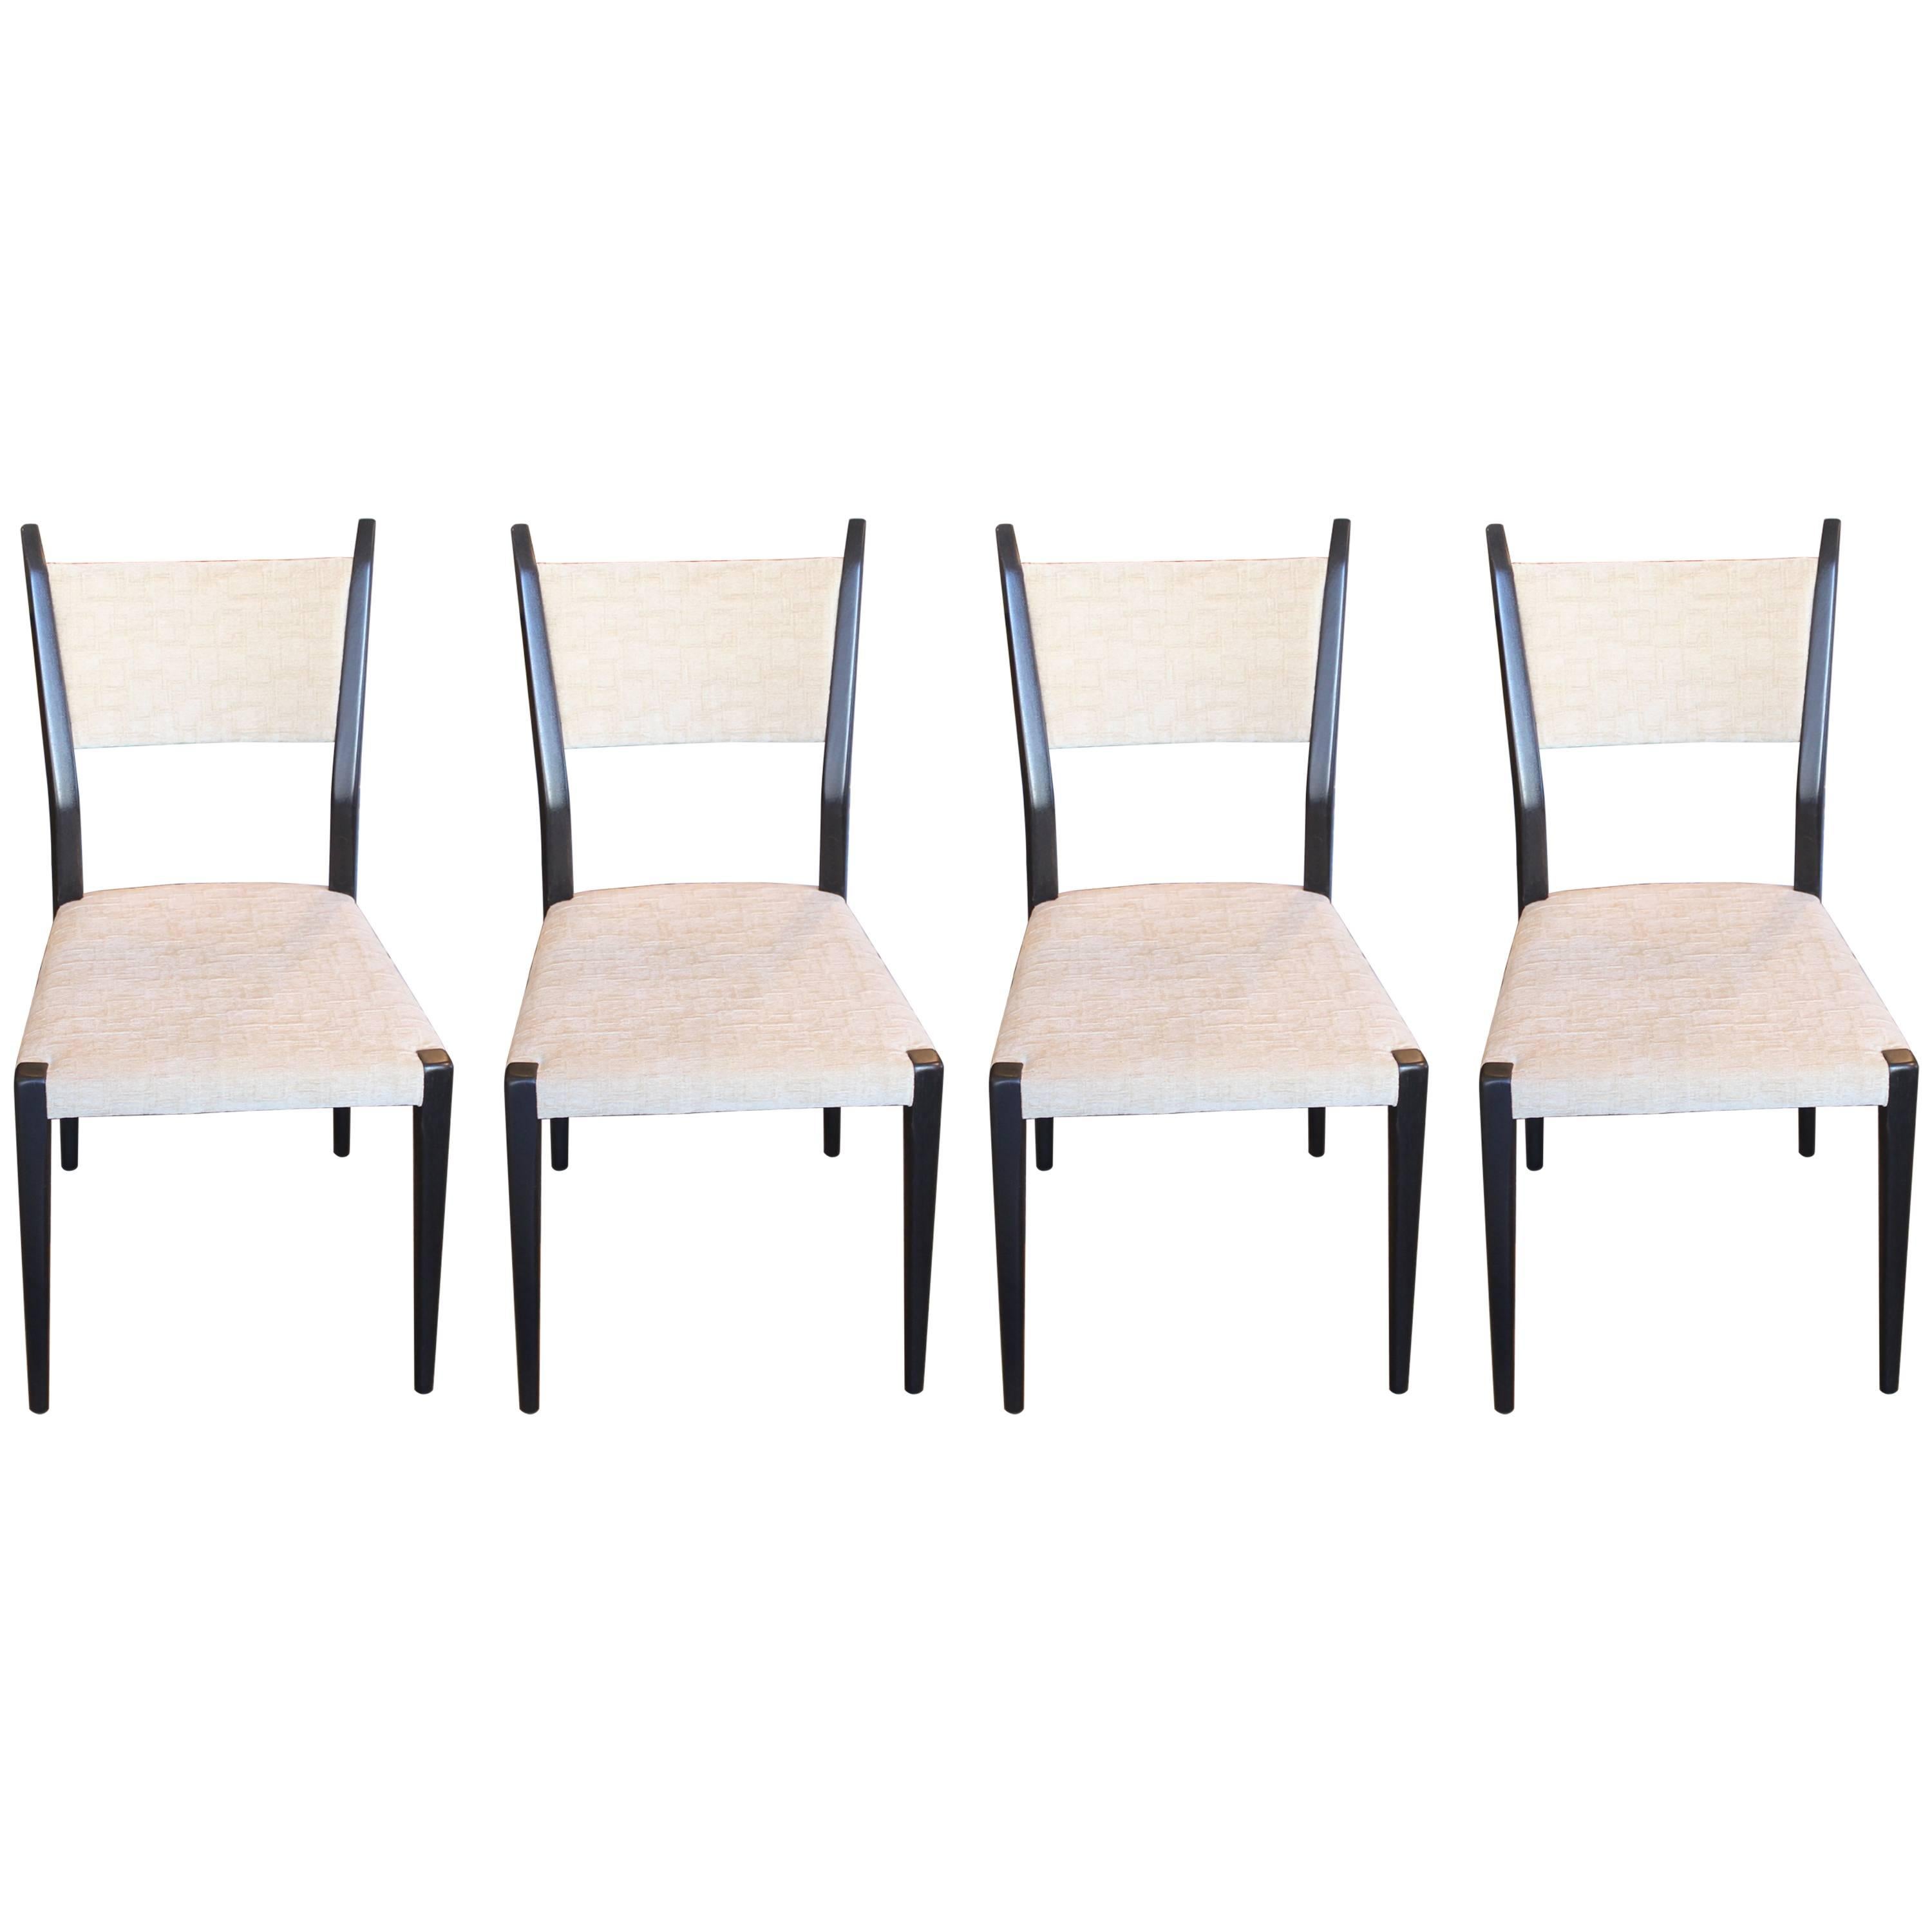 Modern set of four black and white sculptural dining chairs designed by Paul McCobb for Calvin. In original fabric white / cream textured fabric. The contrast between the black frame and light fabric create a nice dynamic. Perfect statement chairs